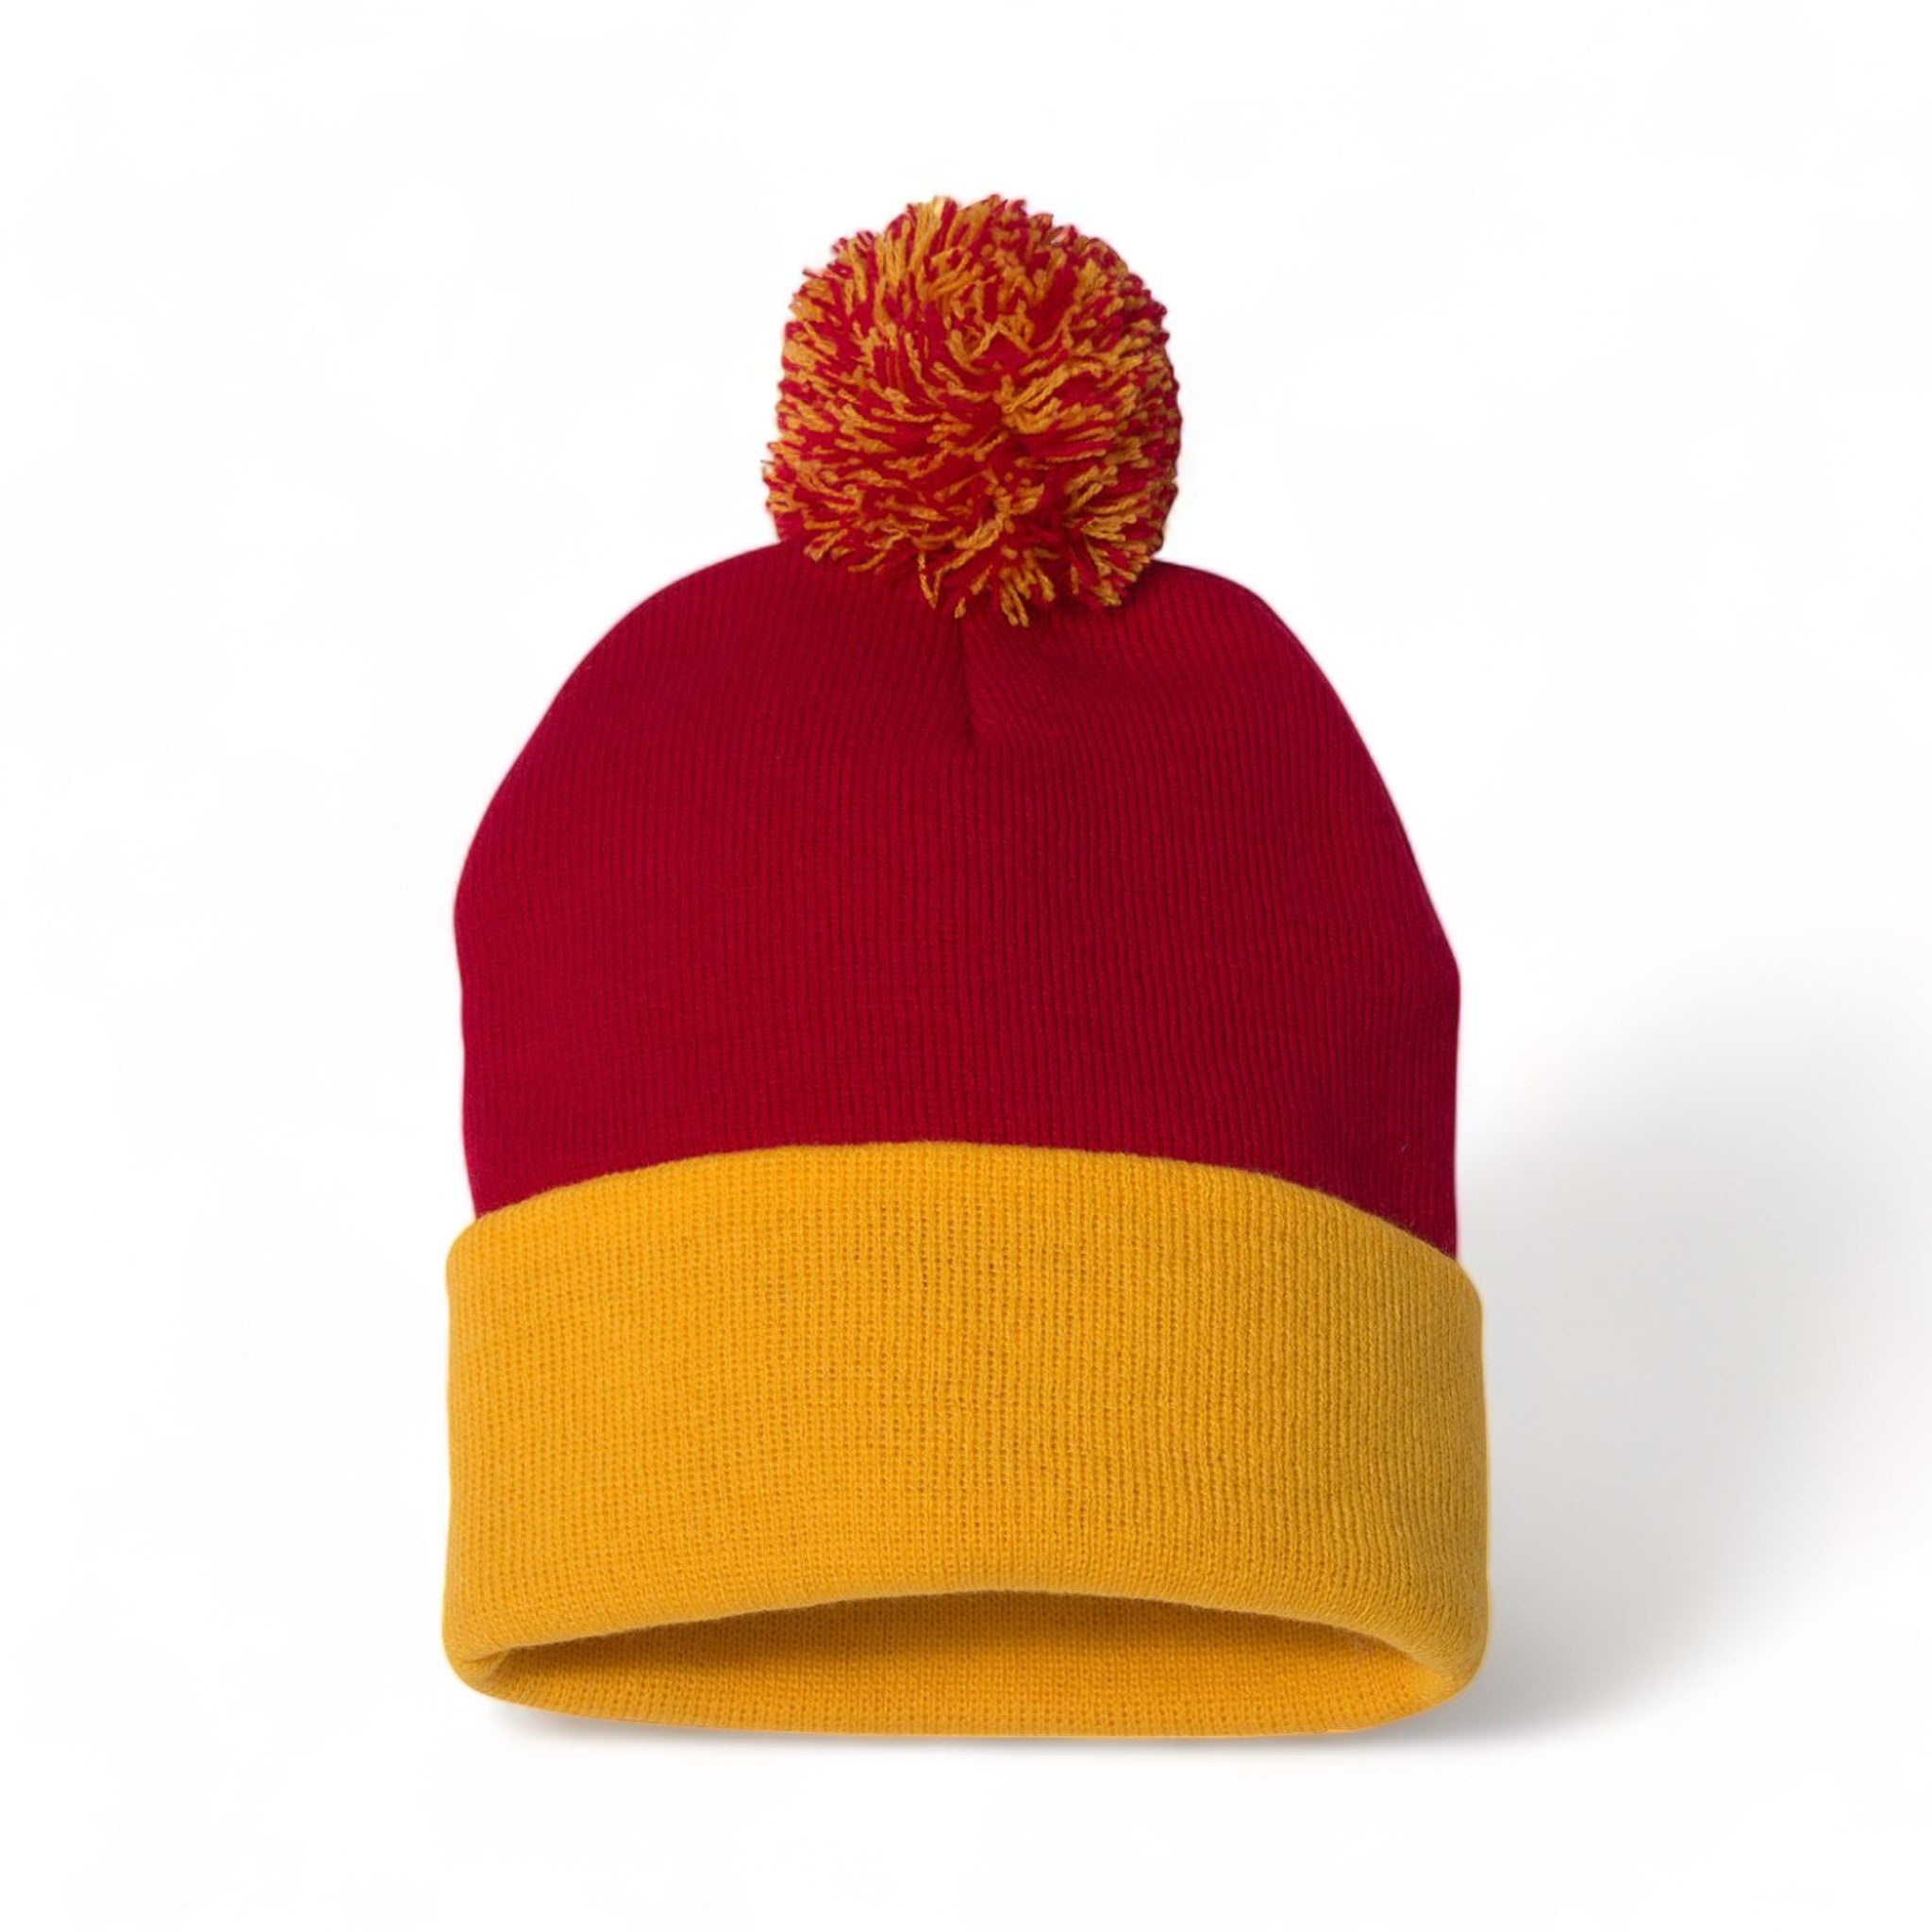 Sportsman SP15 custom beanie in red and gold